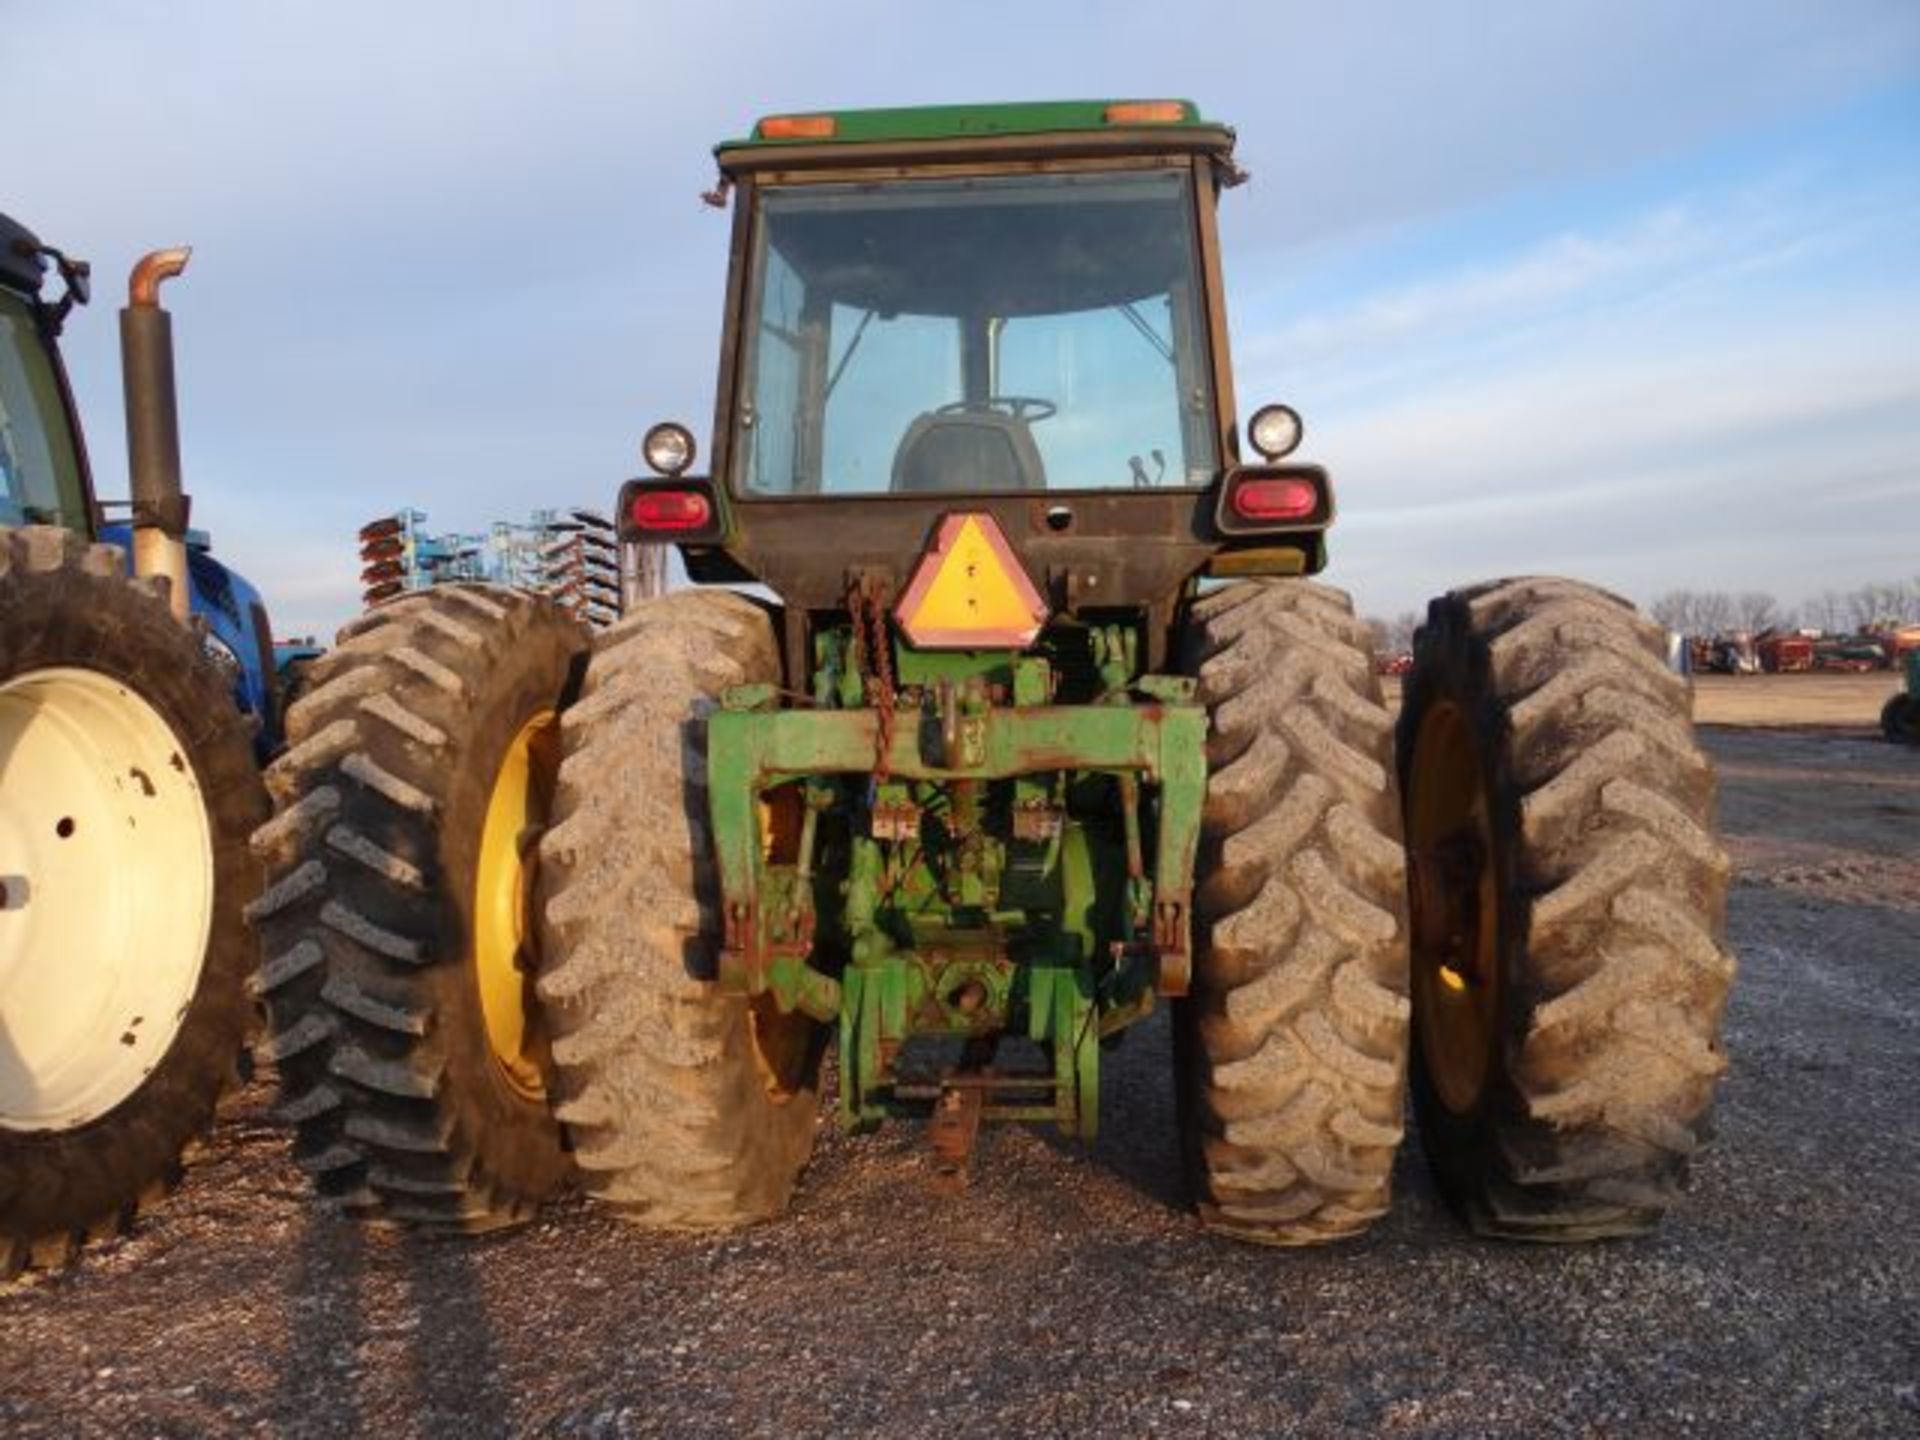 1981 JD 4640 Tractor 9330 hrs, 160-180hp, 3pt Hitch, 3 SCV, sn# 4640H023975RW - Image 4 of 5